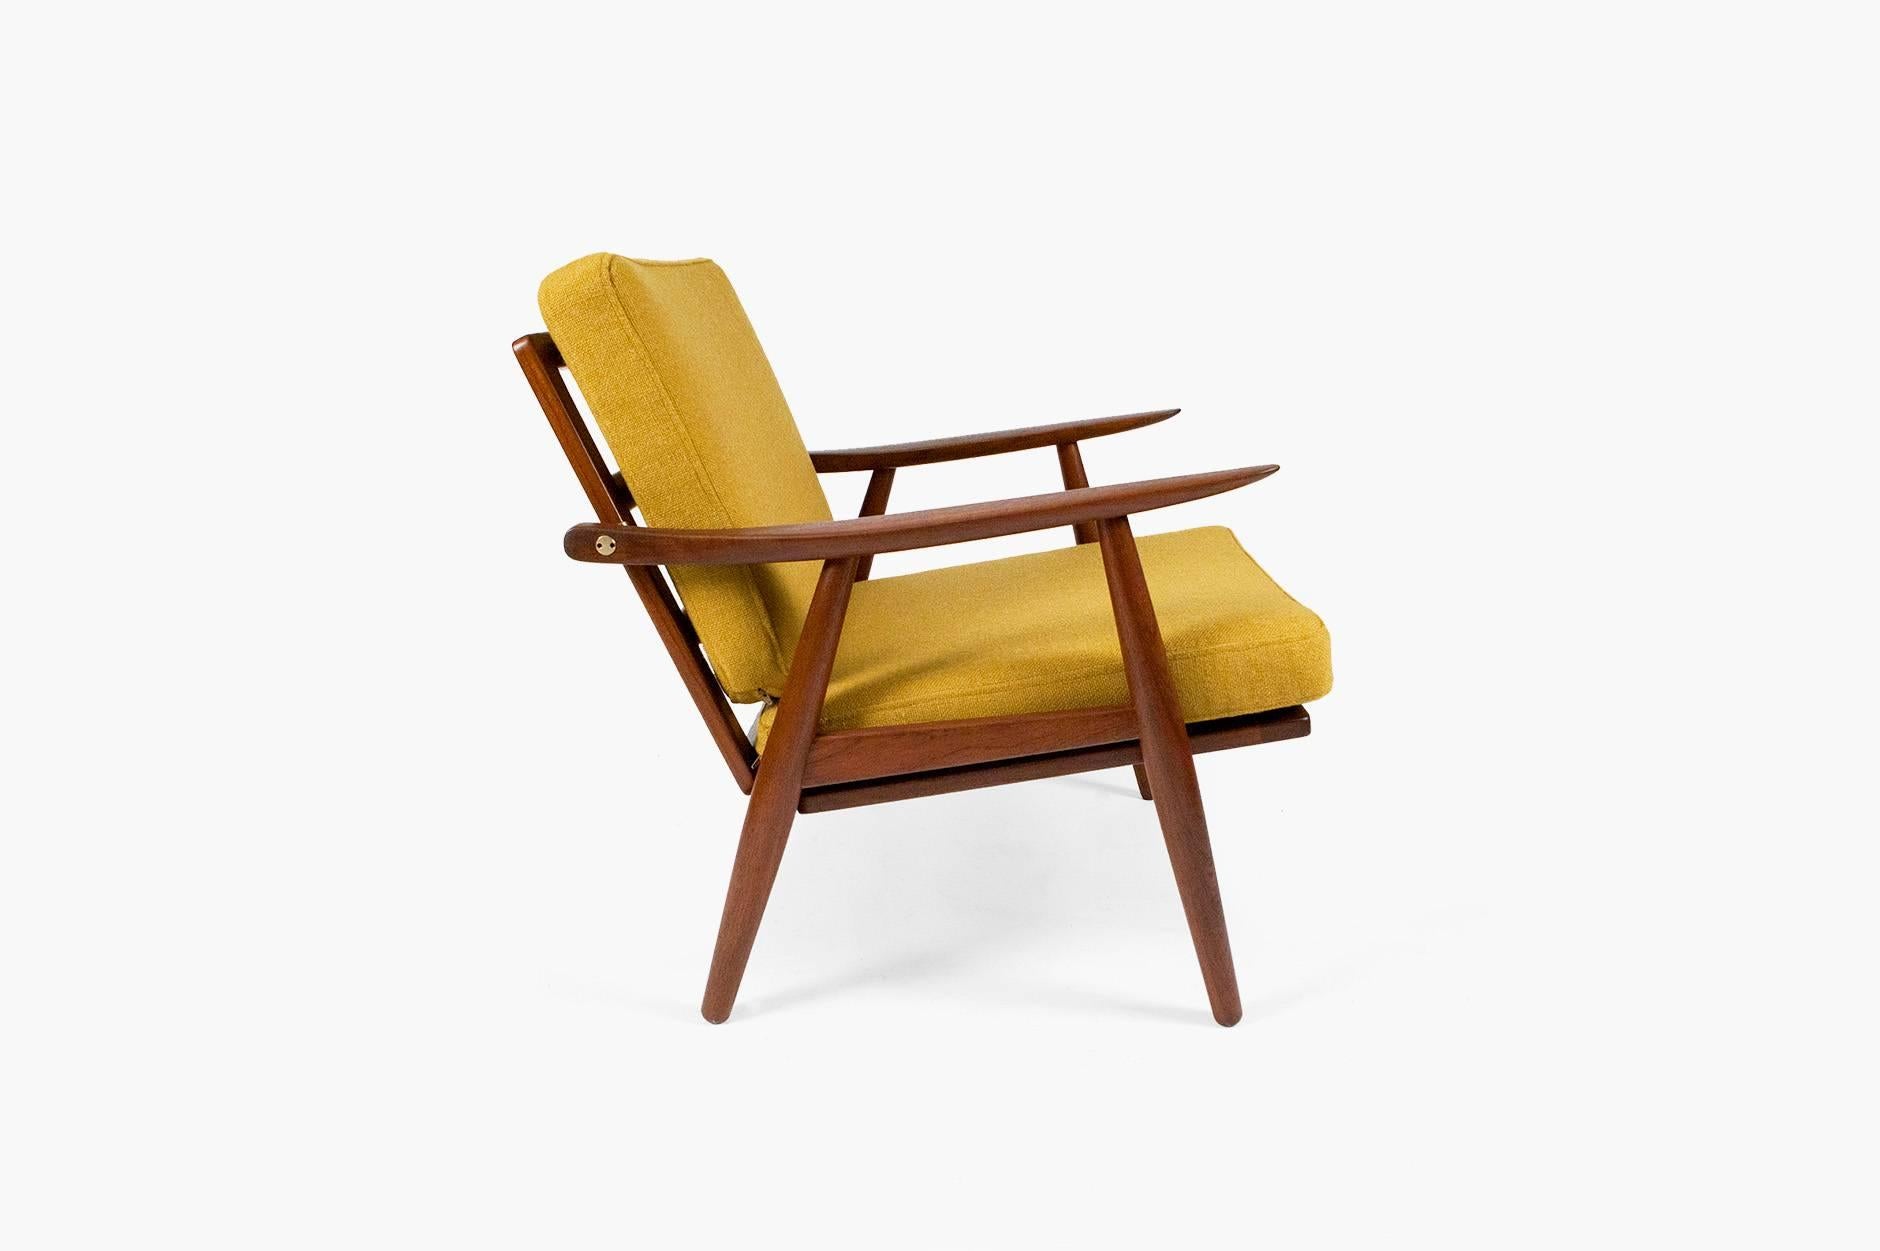 GE-270 lounge chair designed in 1956. Produced by GETAMA, Gedsted, Denmark. Restored teak frame with exposed brass fittings. New cushions covered in mustard yellow Bute wool fabric.
               